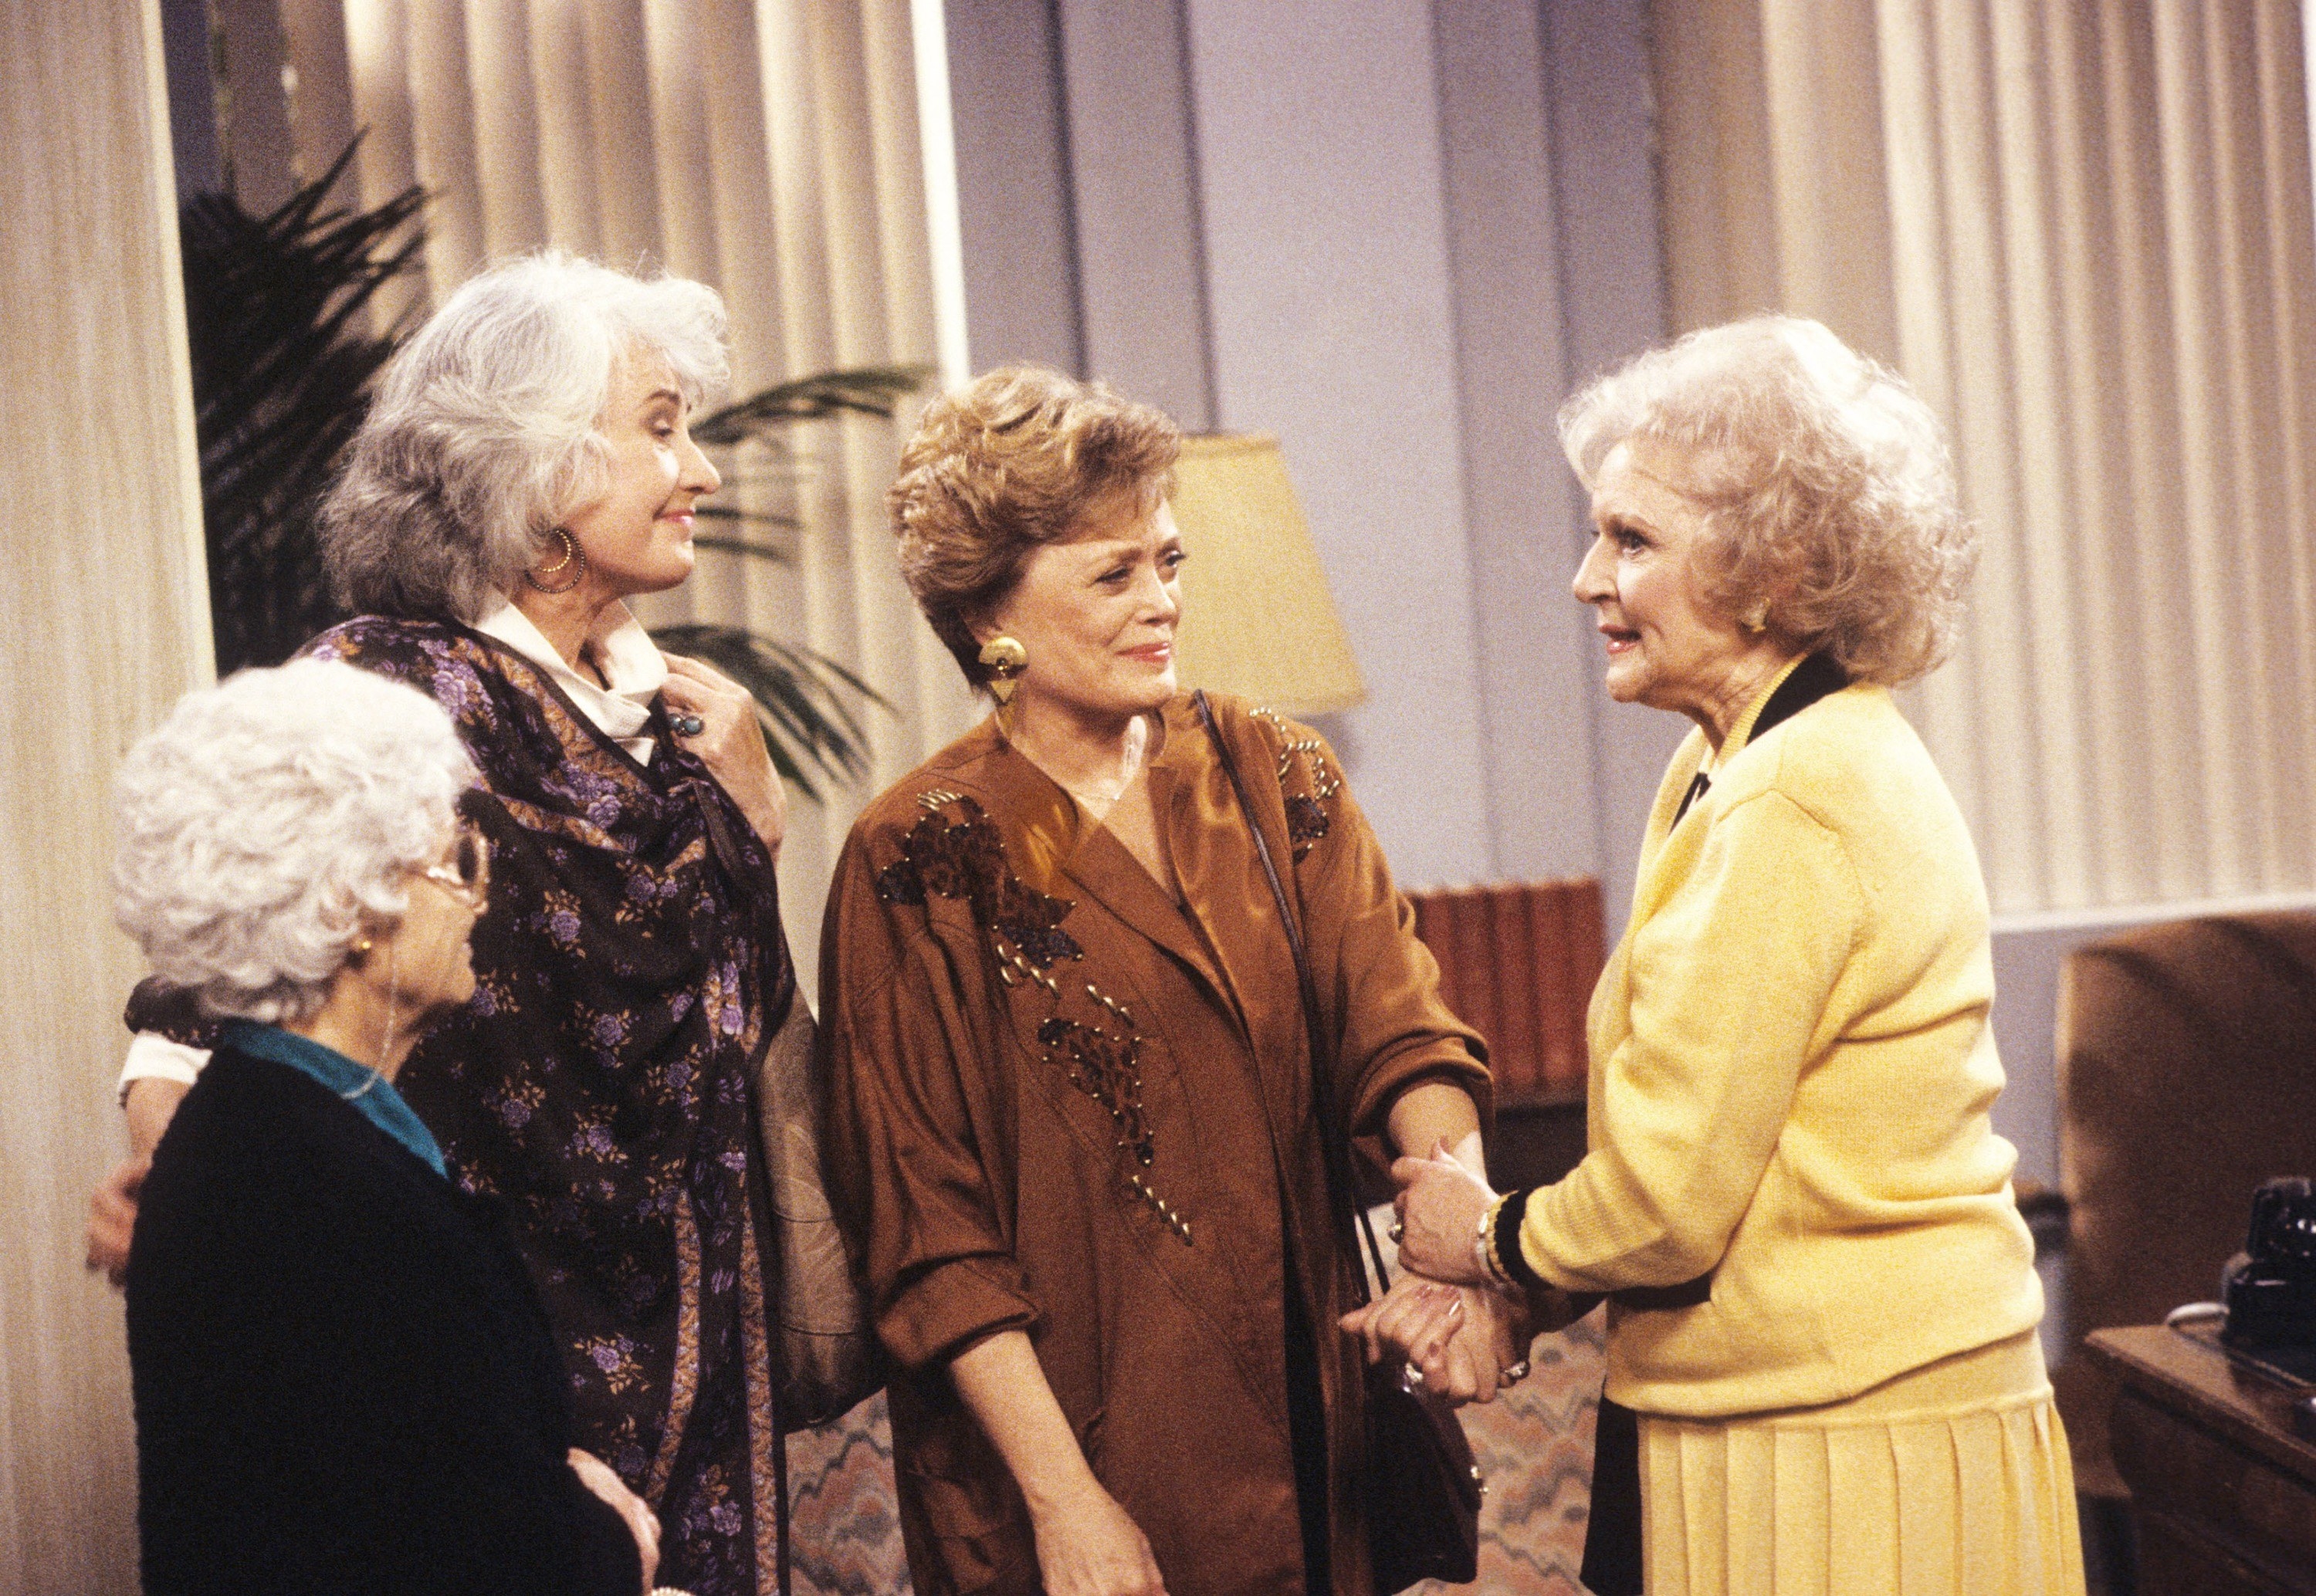 The four golden girls smiling at each other